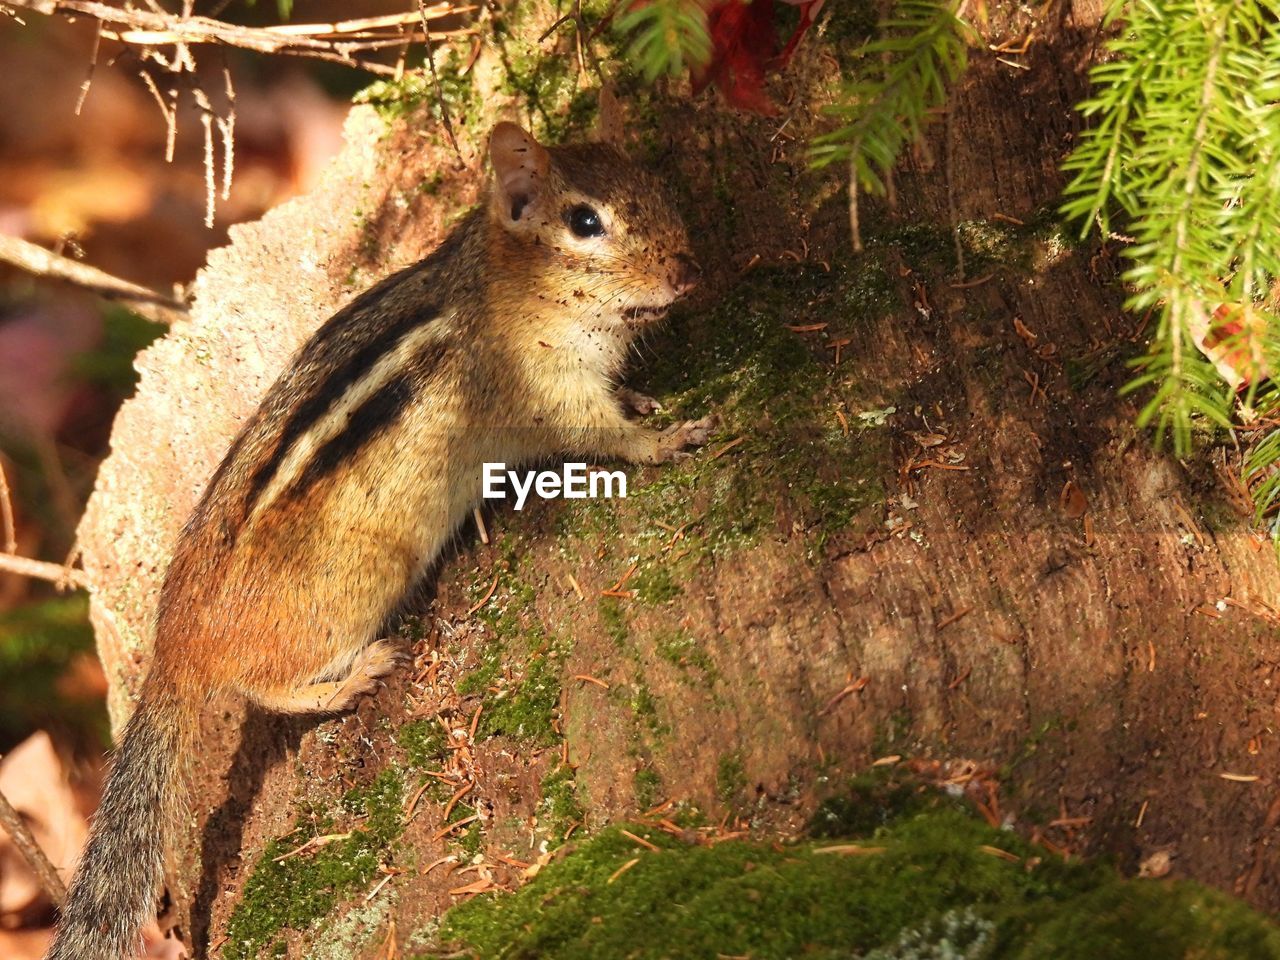 Chipmunk on a moss covered log